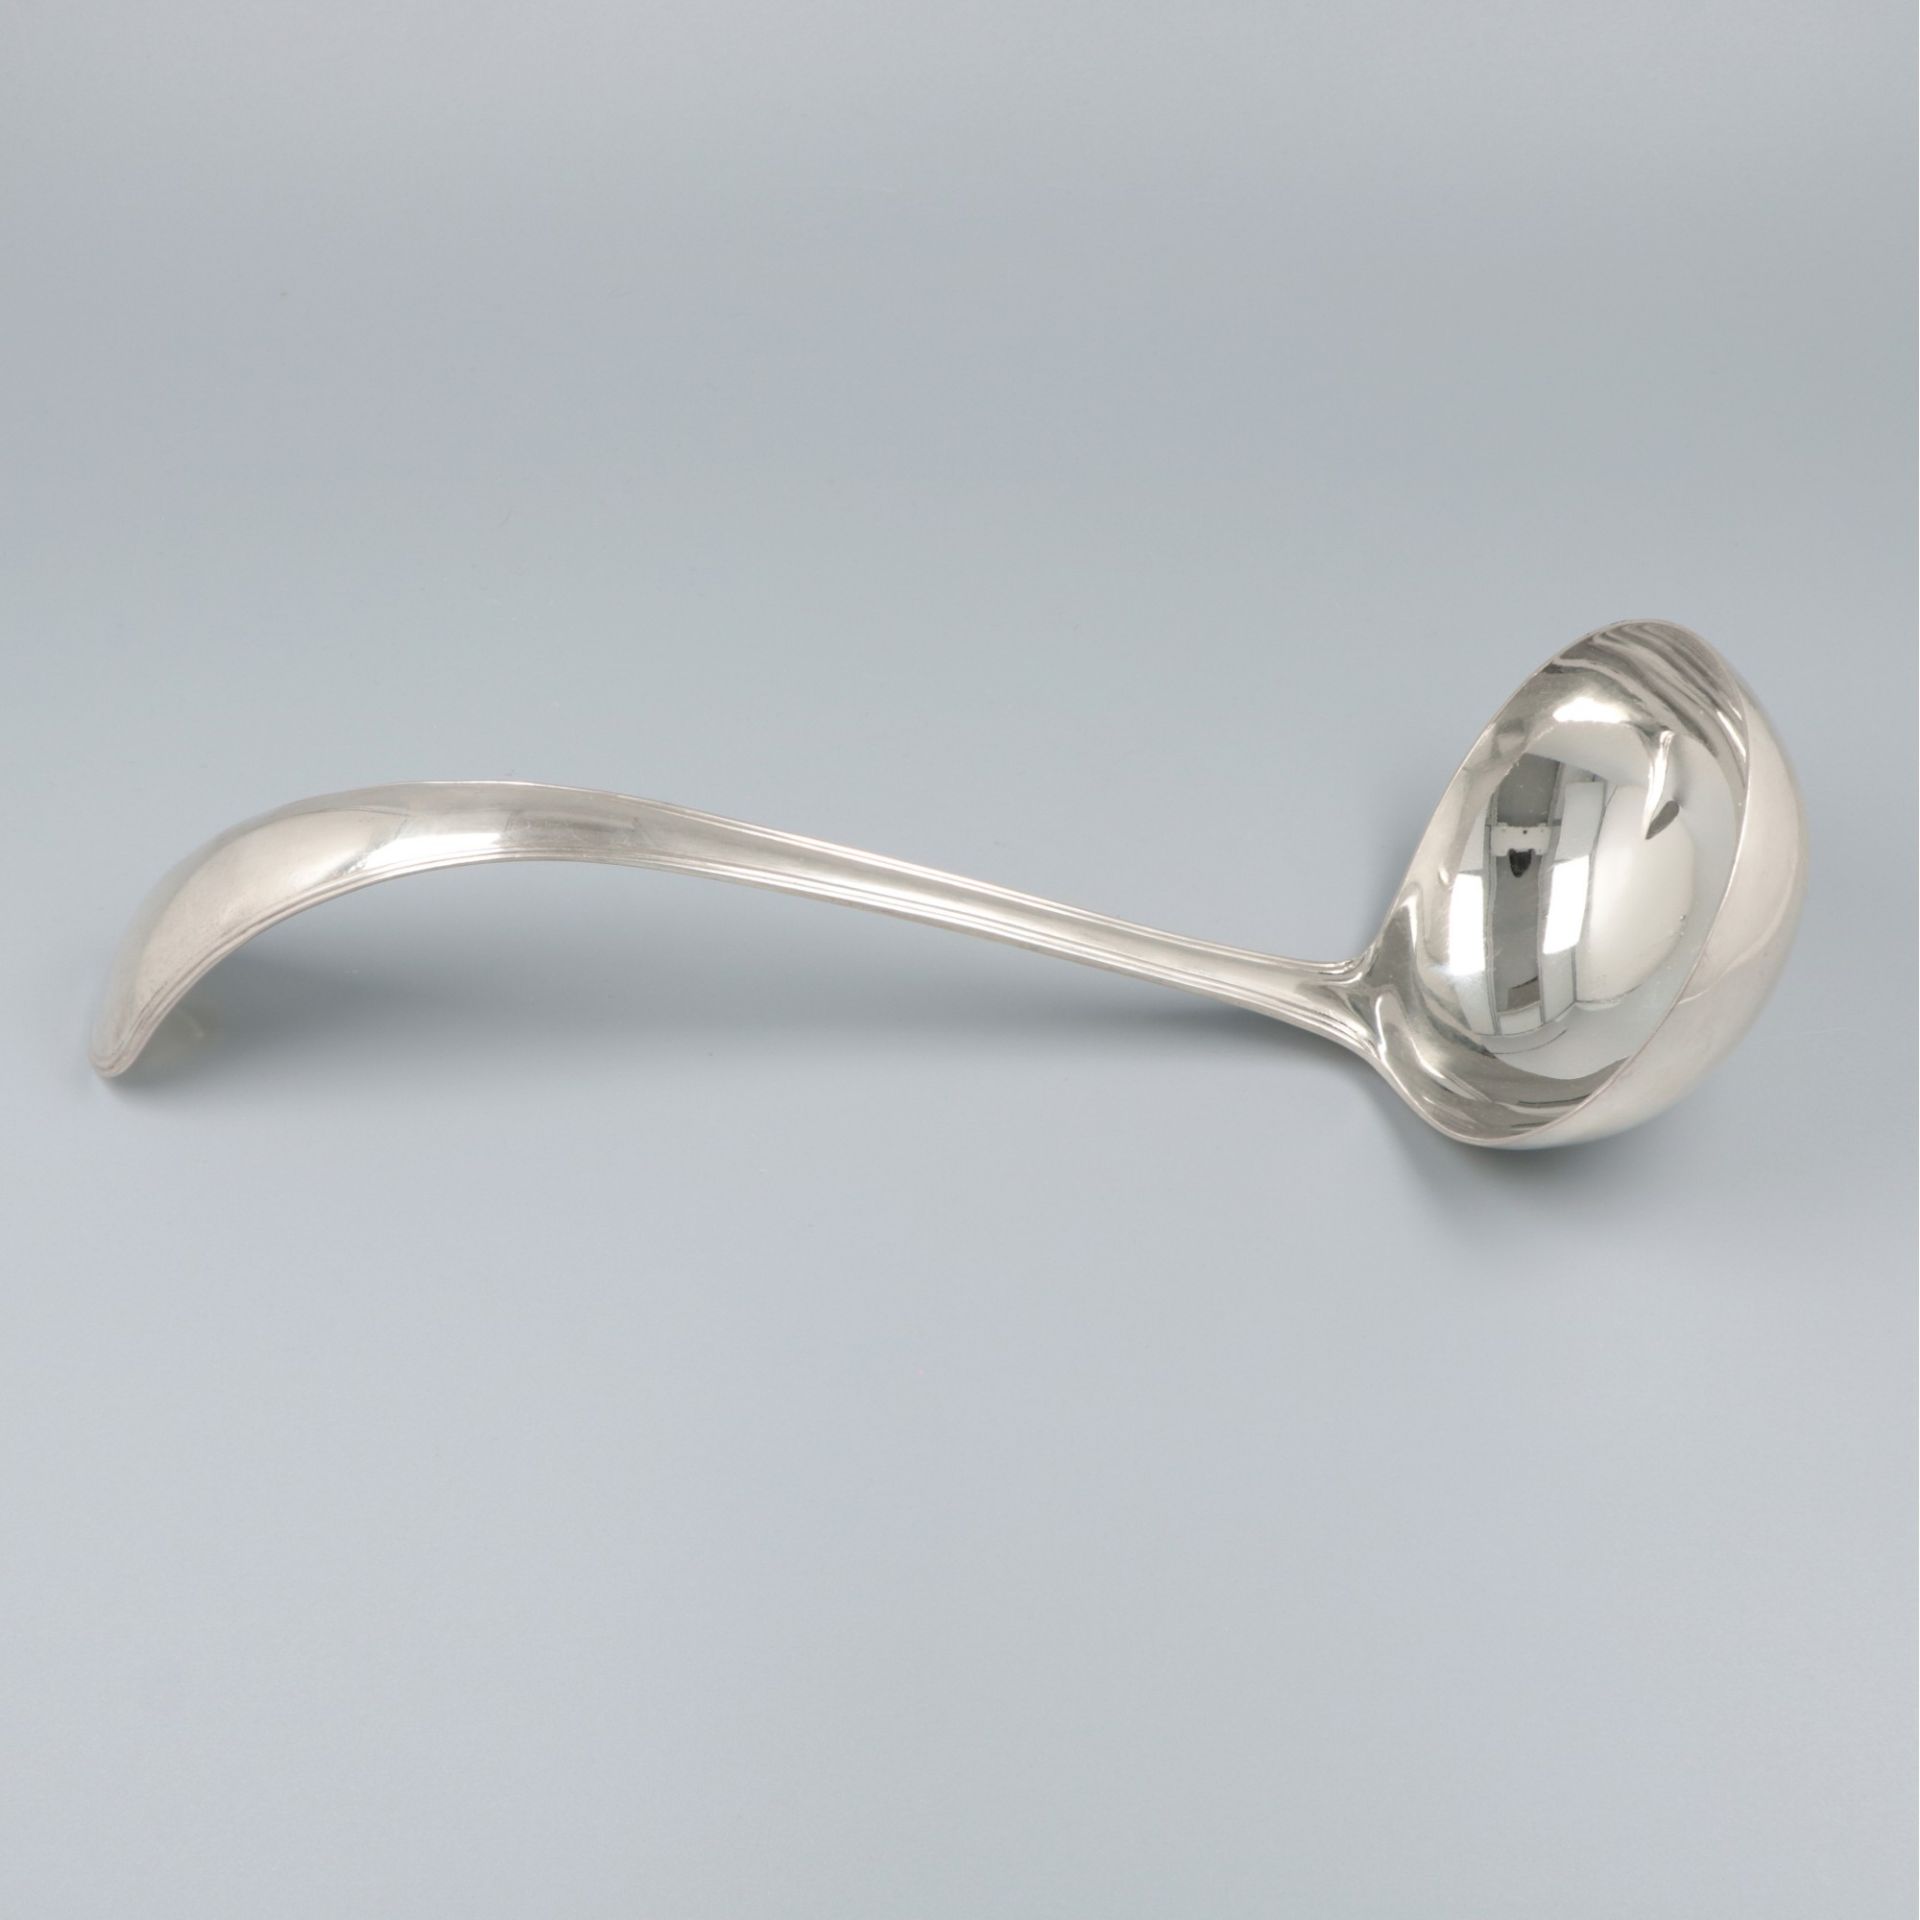 Soup spoon, silver. - Image 2 of 6